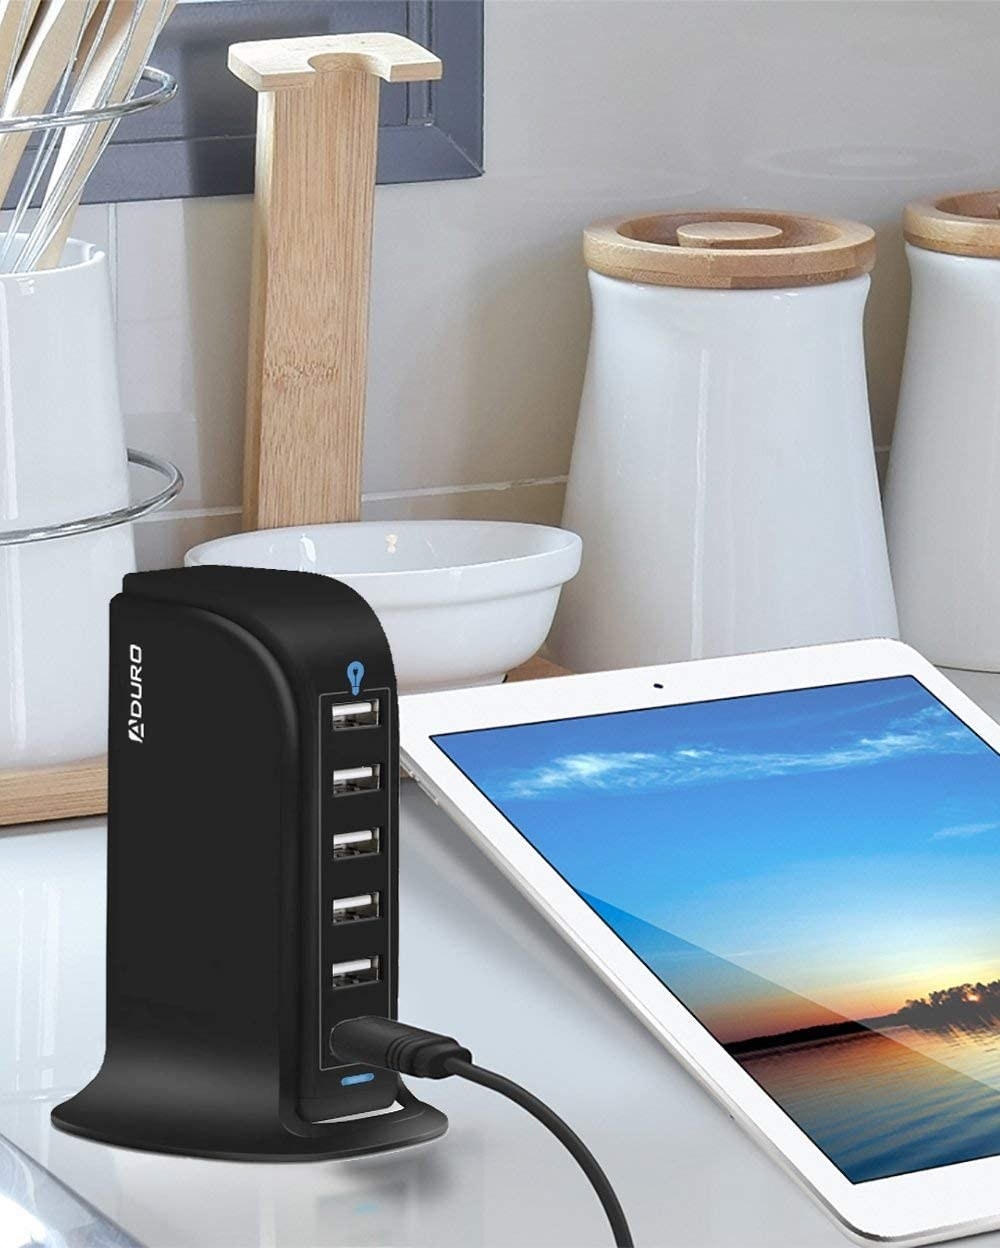 The charging station with six USB ports